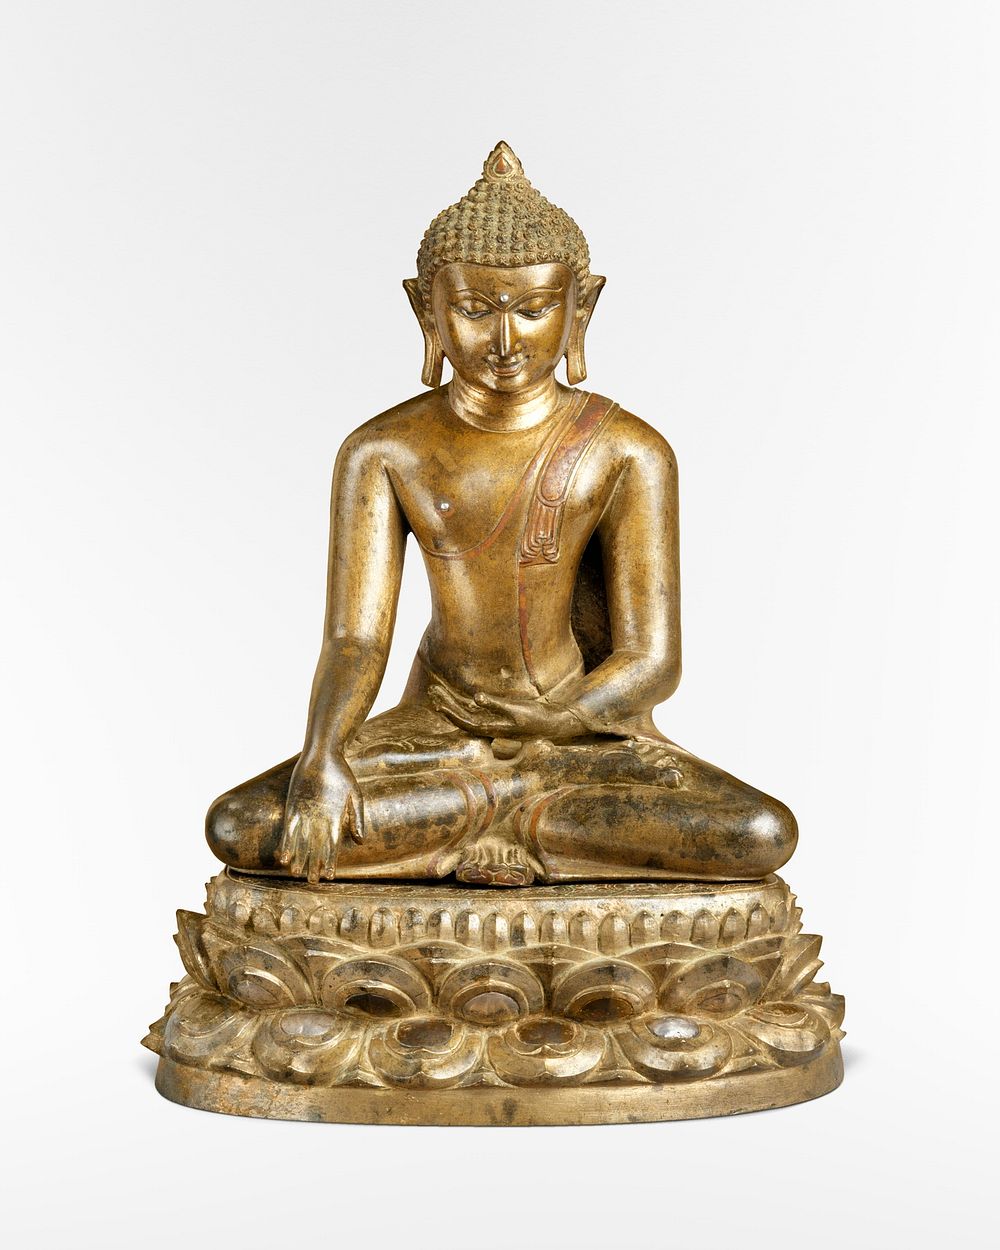 Seated Buddha with Double-Lotus Base (late 11th century). Original public domain image from The MET Museum. Digitally…